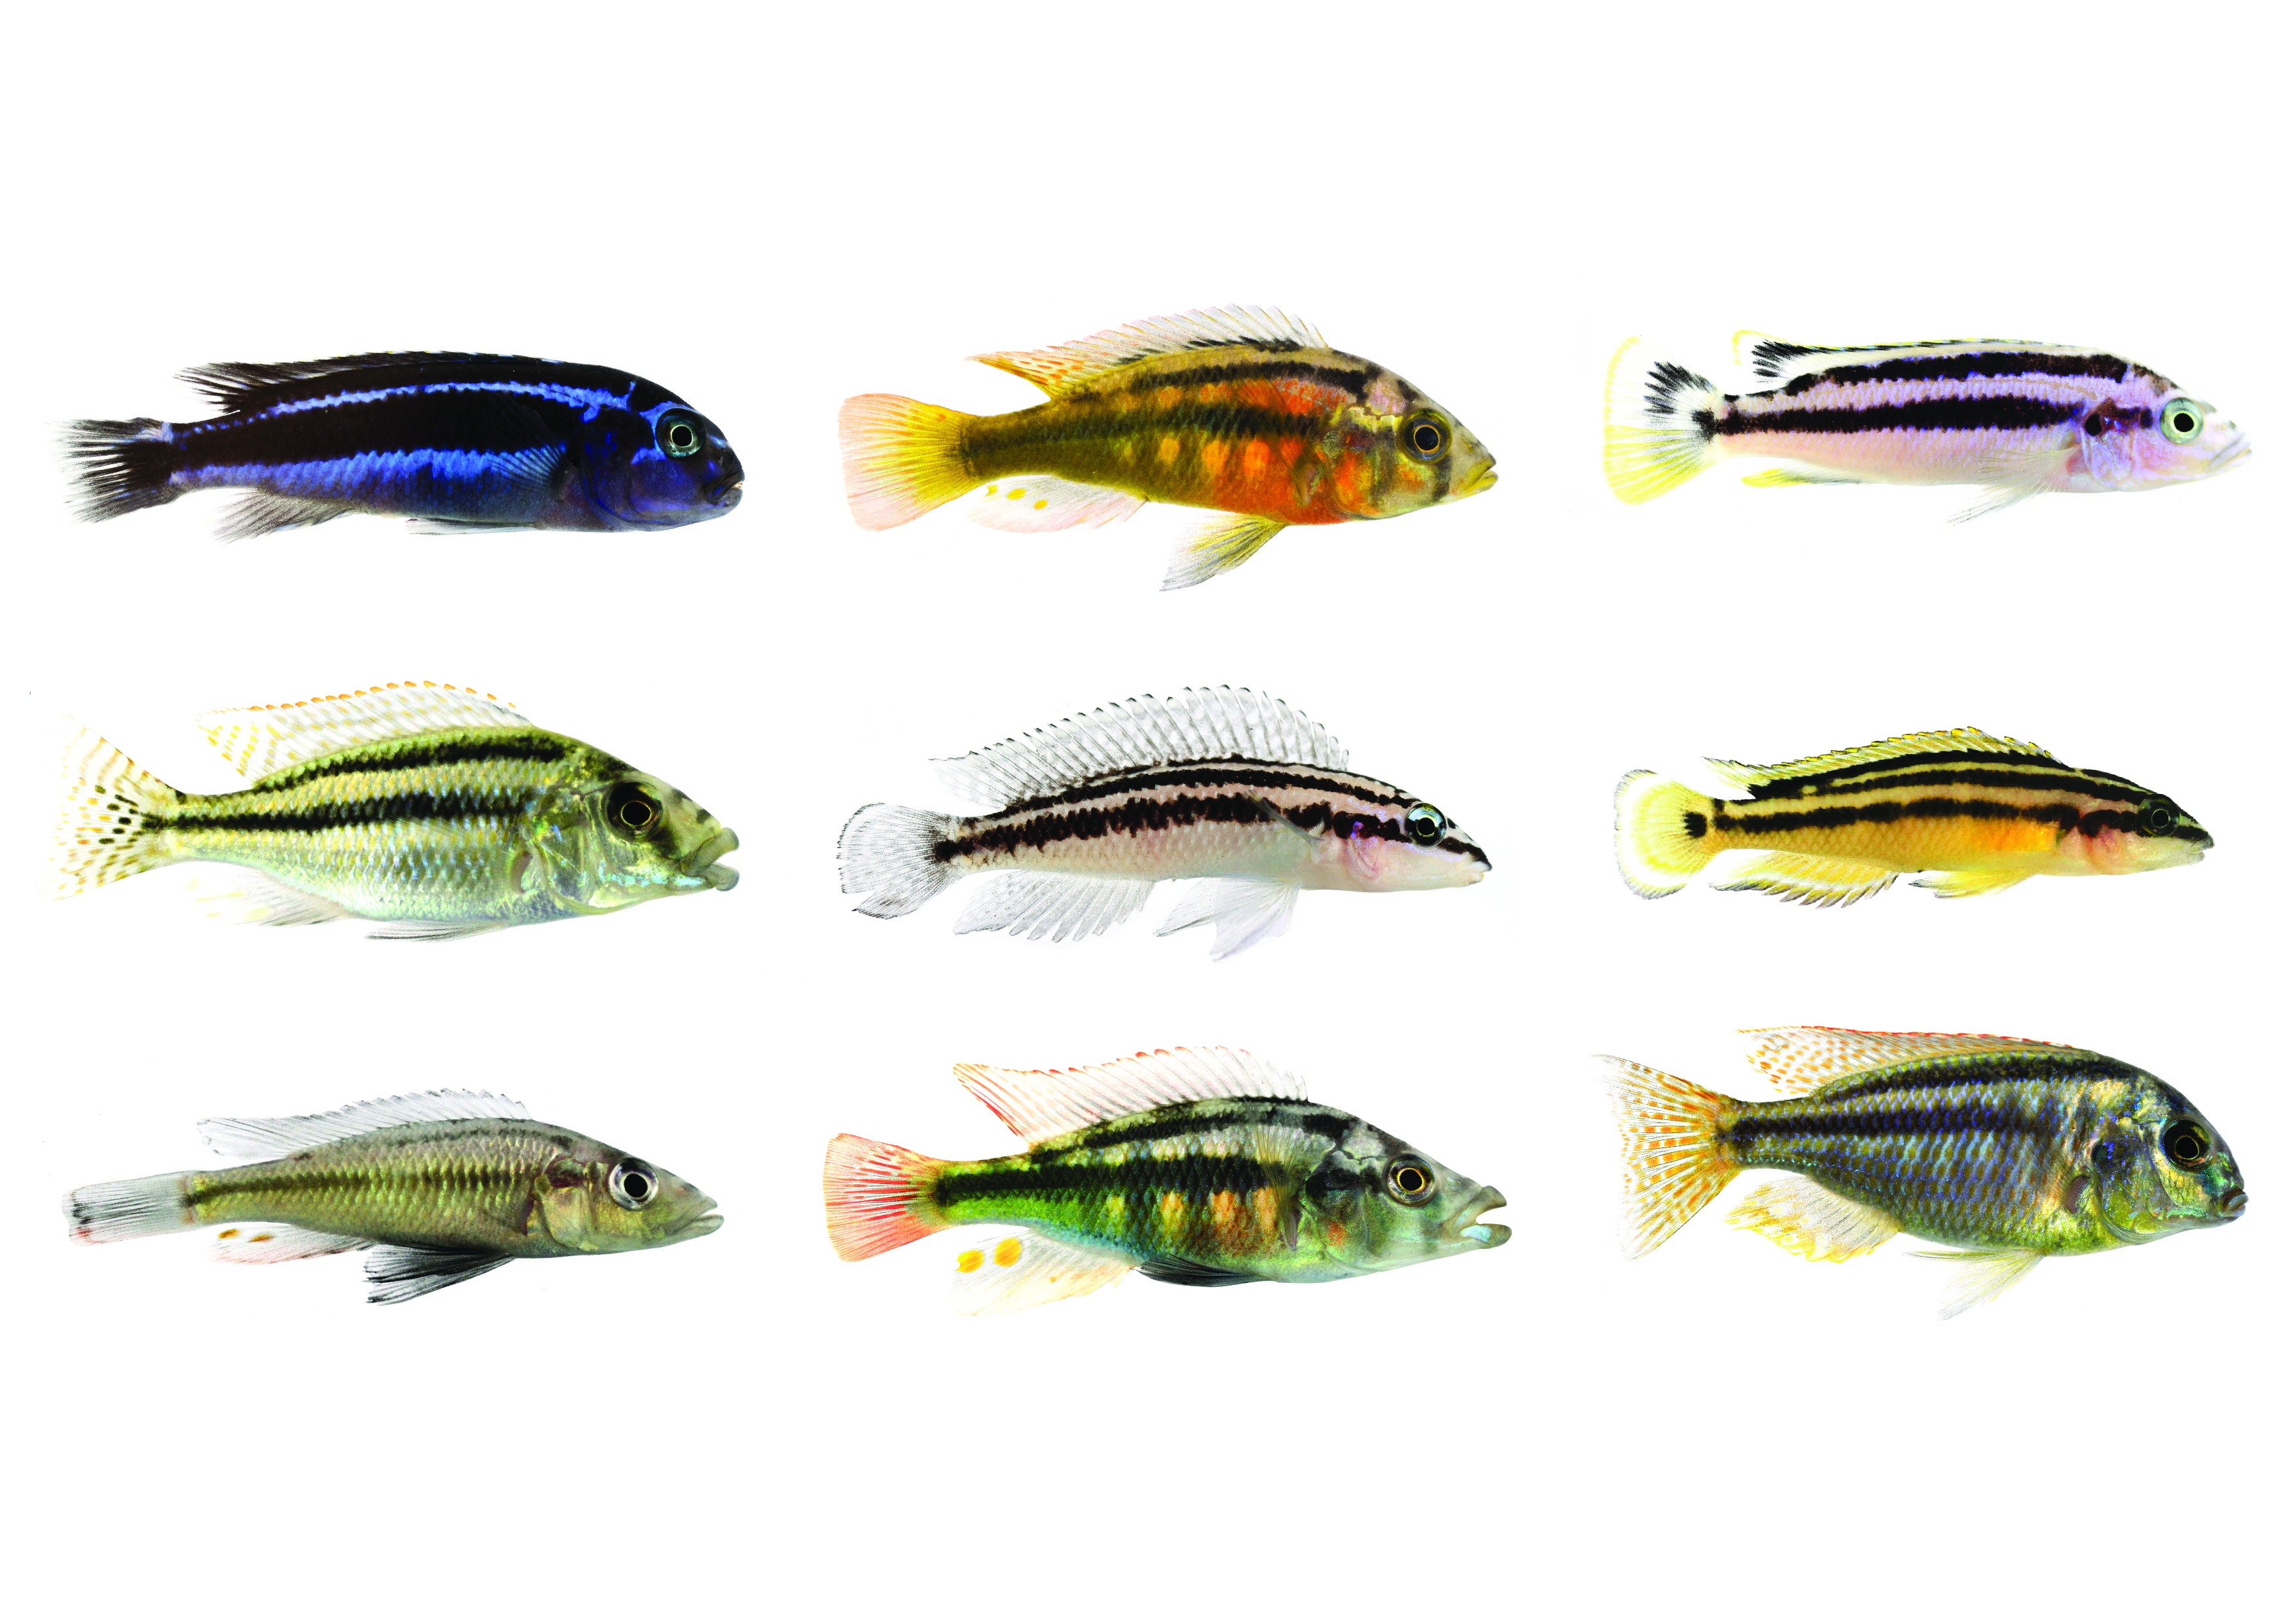 Colourful cichlids with horizontal stripes living in the large African lakes Malawi, Victoria and Tanganjika illustrate the repeating (convergent) process of evolution.